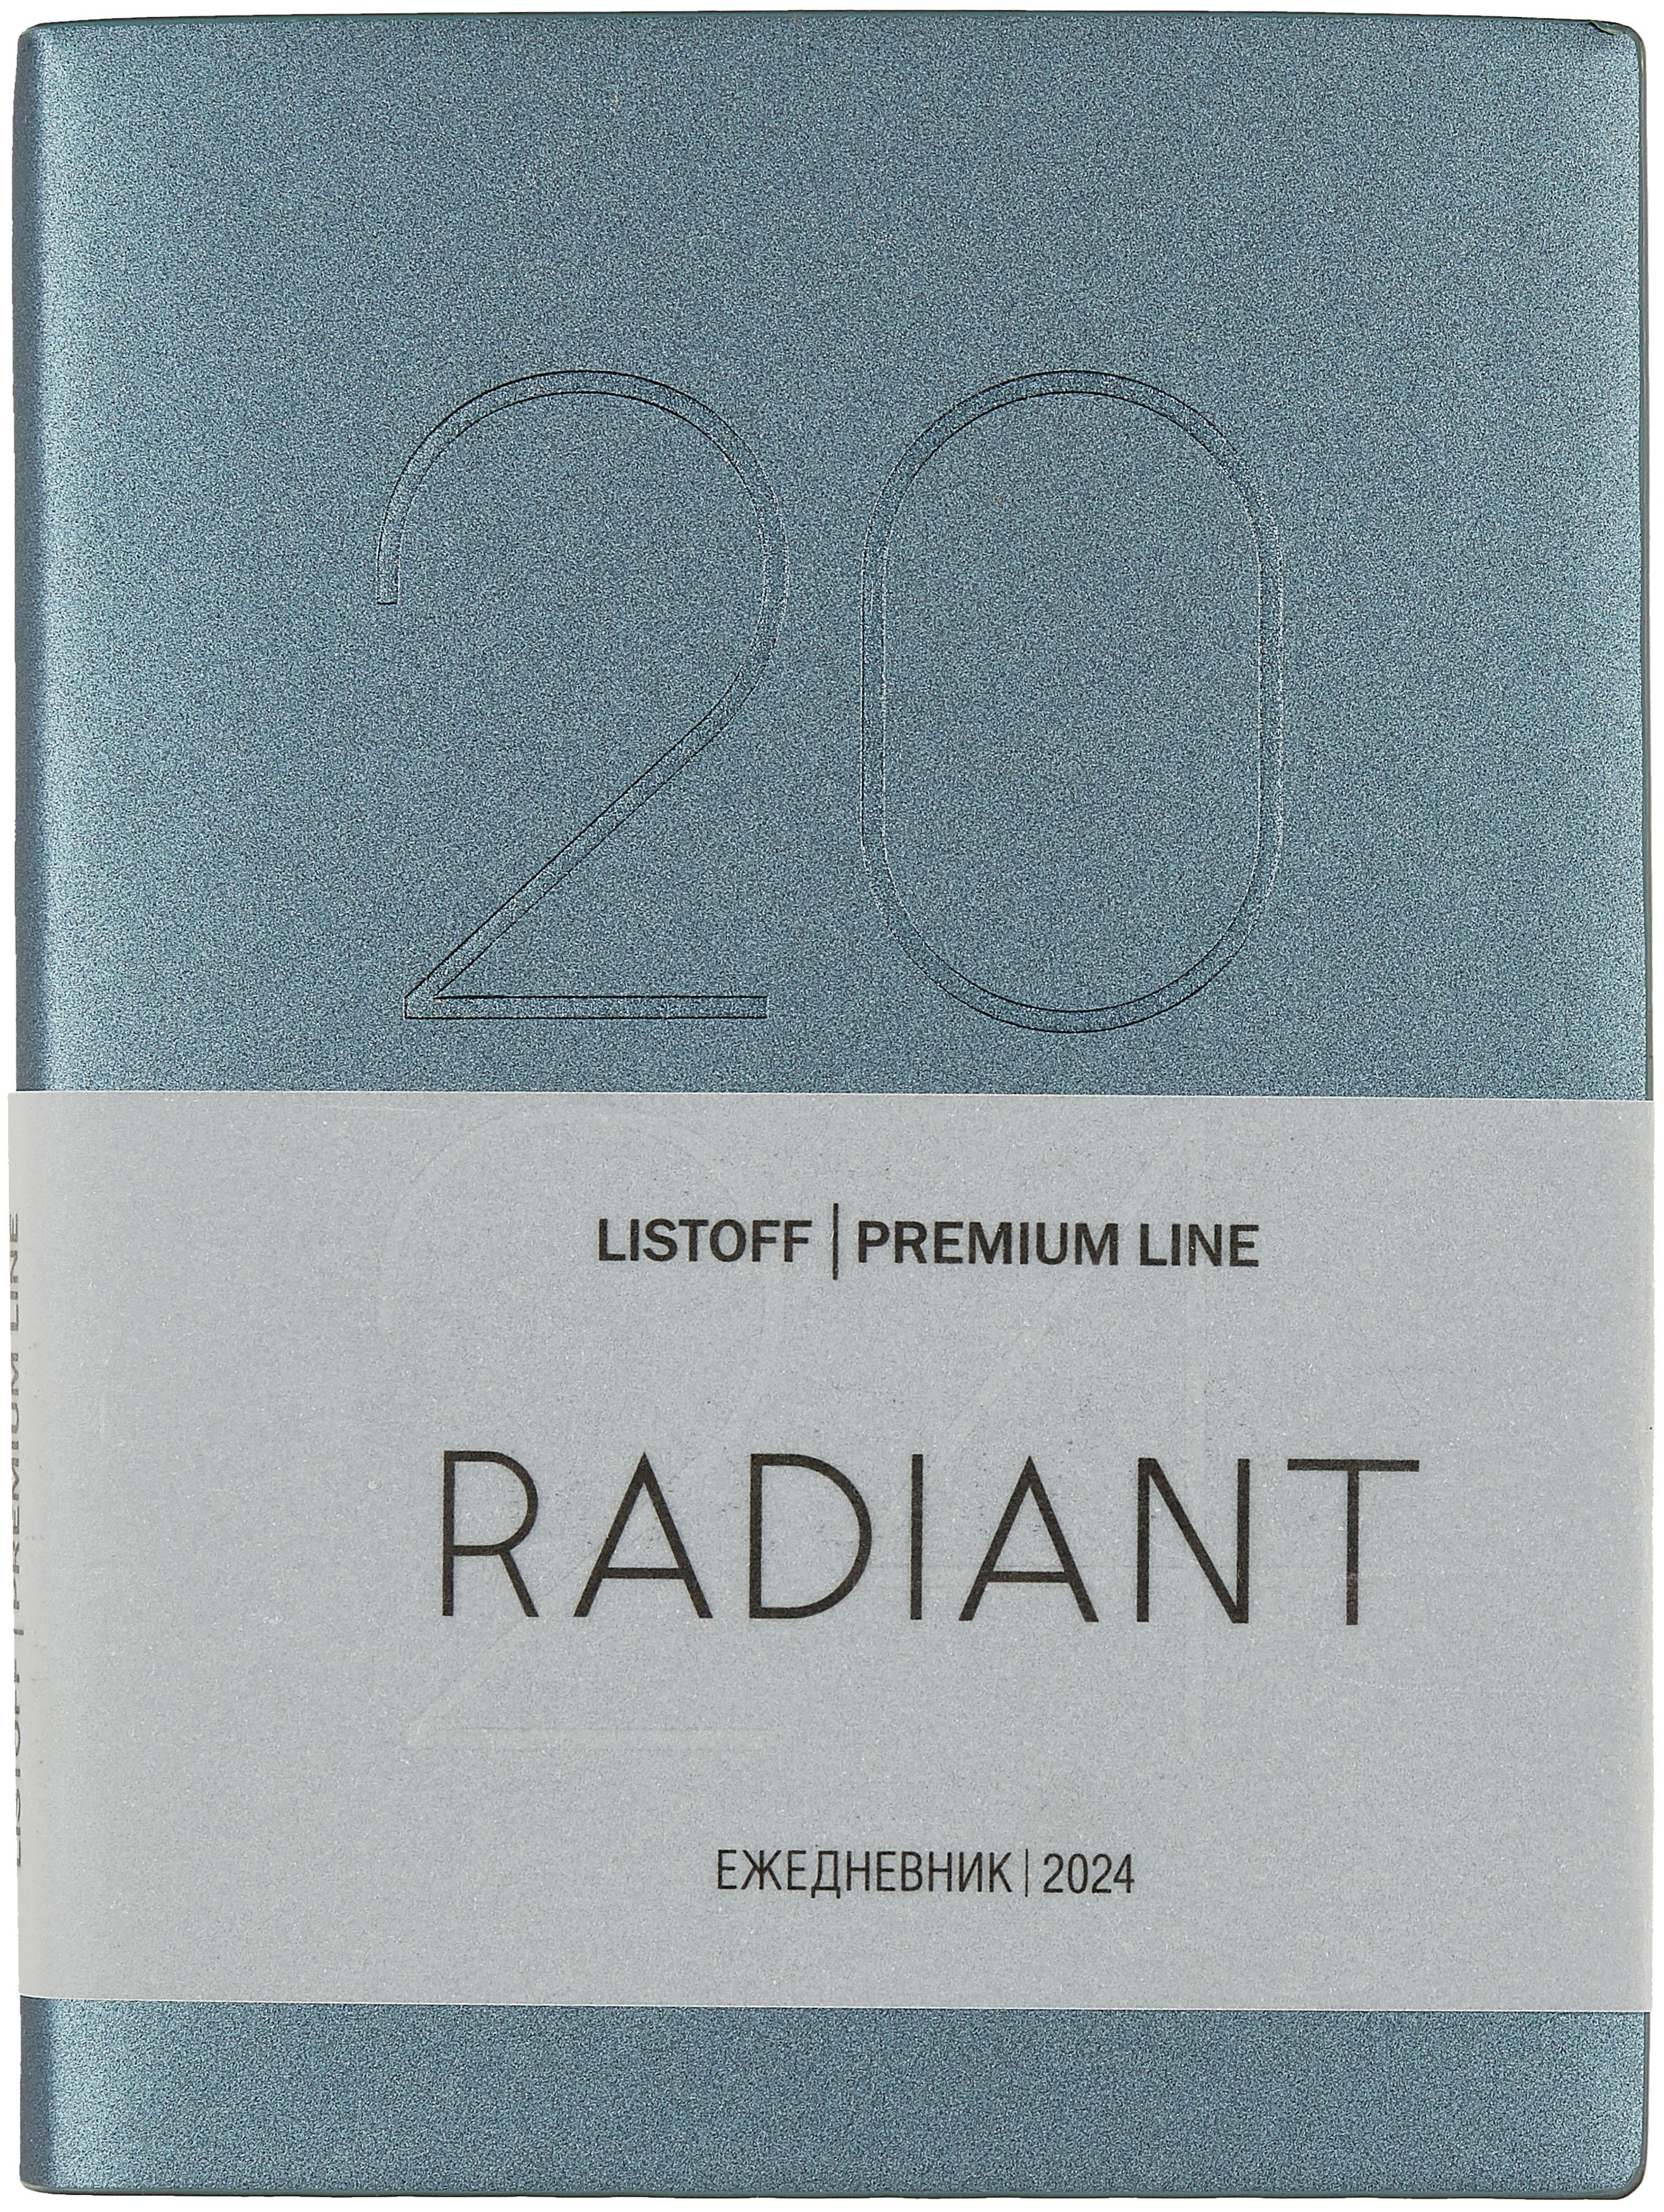  . 2024. 6 176  Radiant  -, ., .,  Soft Touch, ., , 